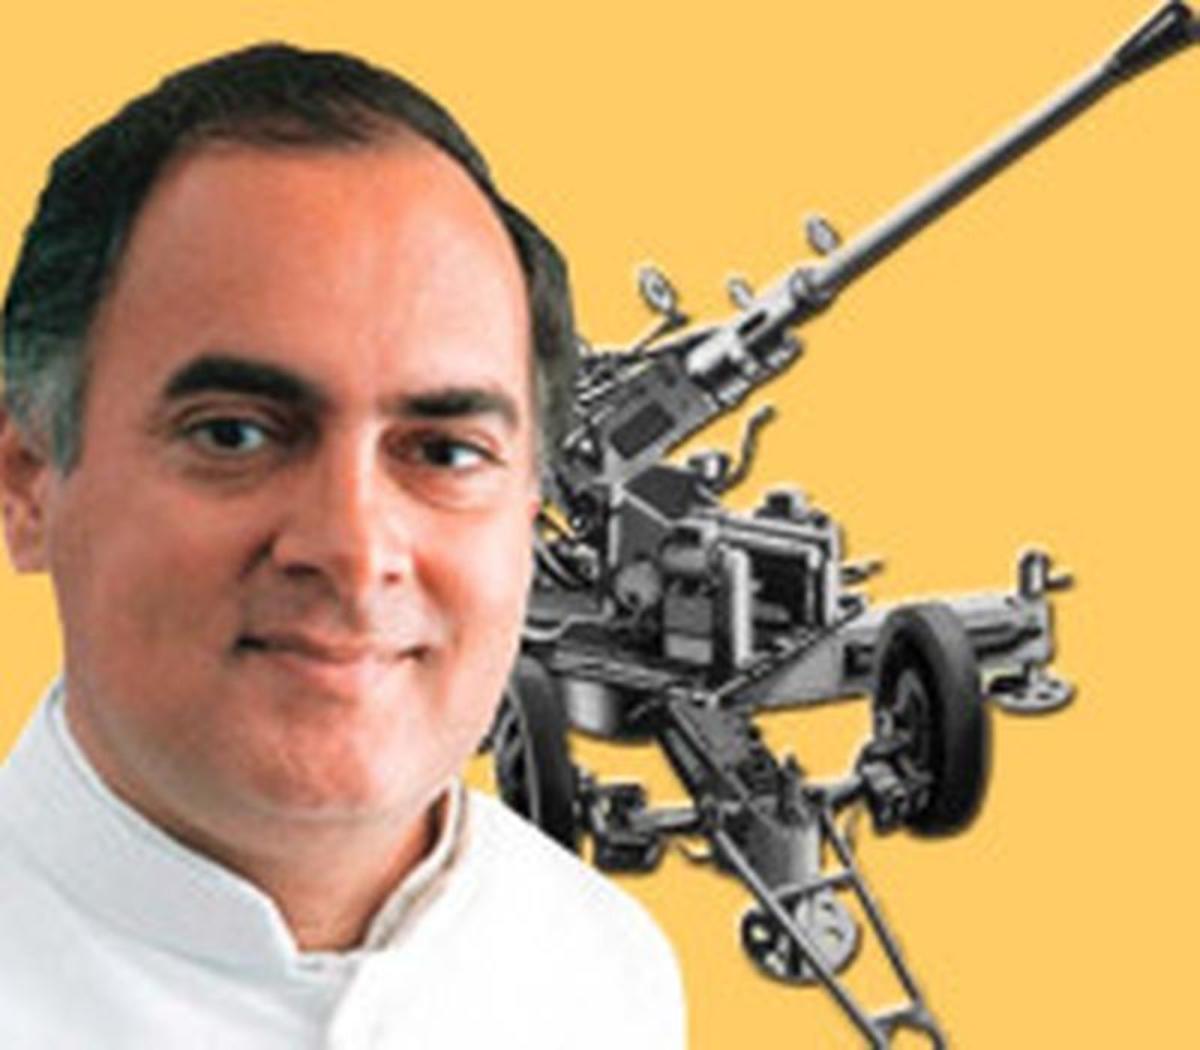 bofors-gun-and-a-controversy-in-india-about-it